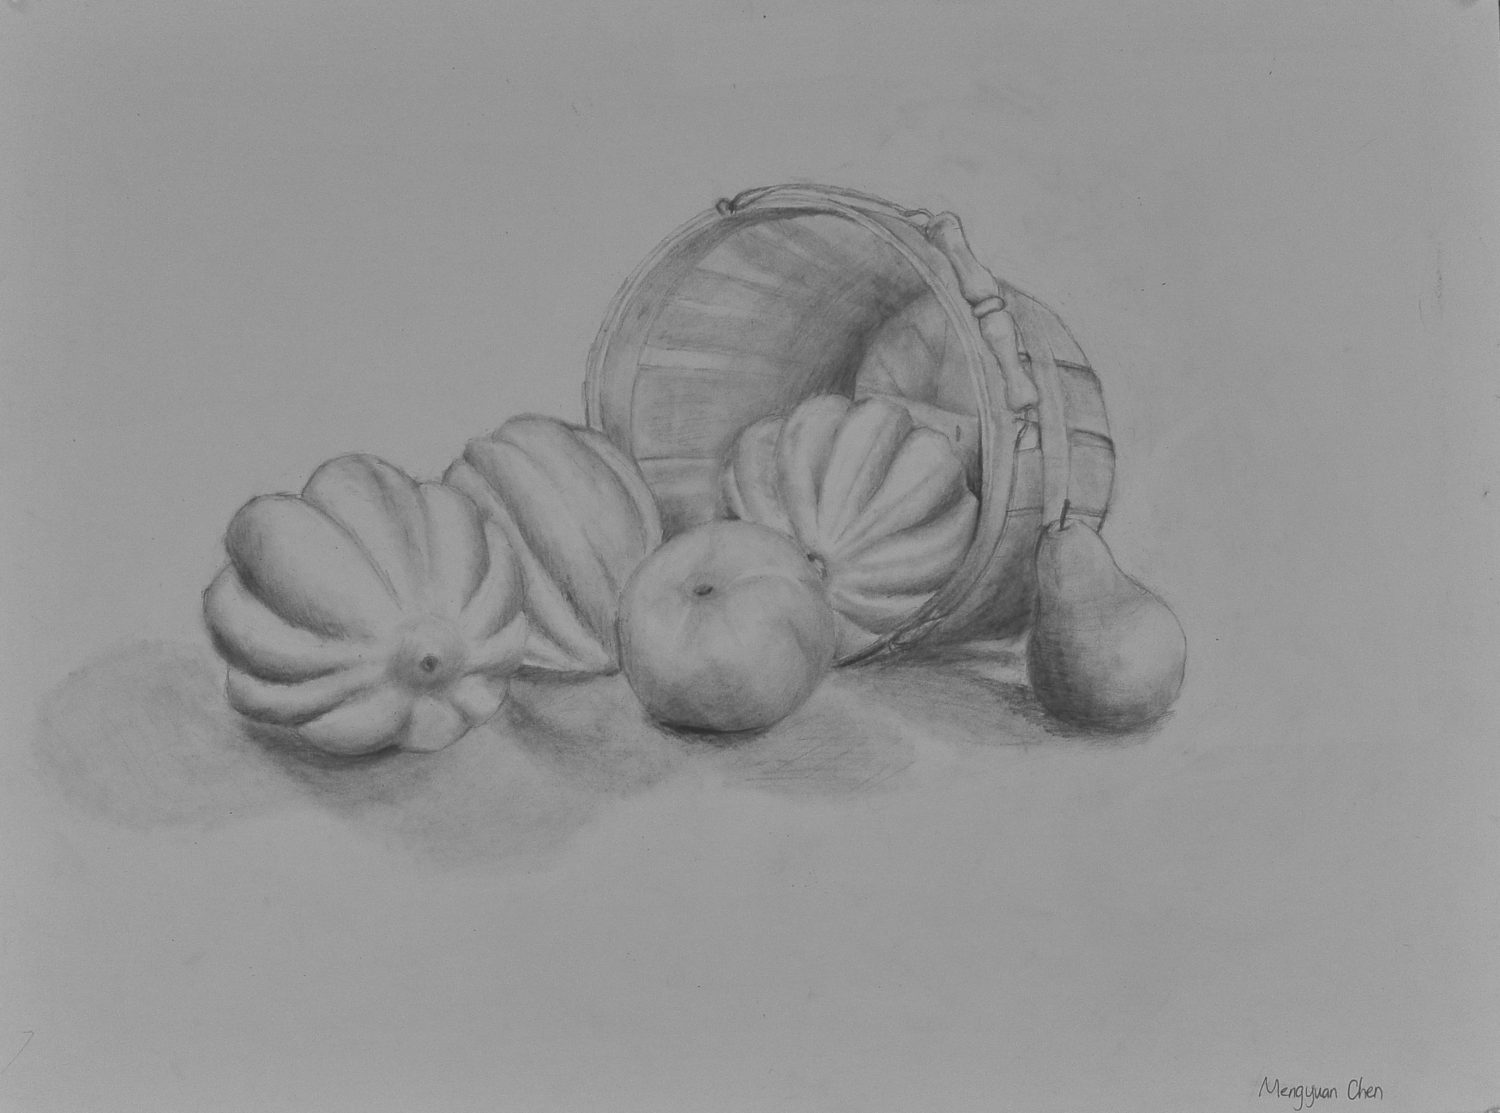 thumbnail of Pumpkins by Mengyuan Chen. Medium: Graphite on Paper. Size 18 x 24 inches Date 2014